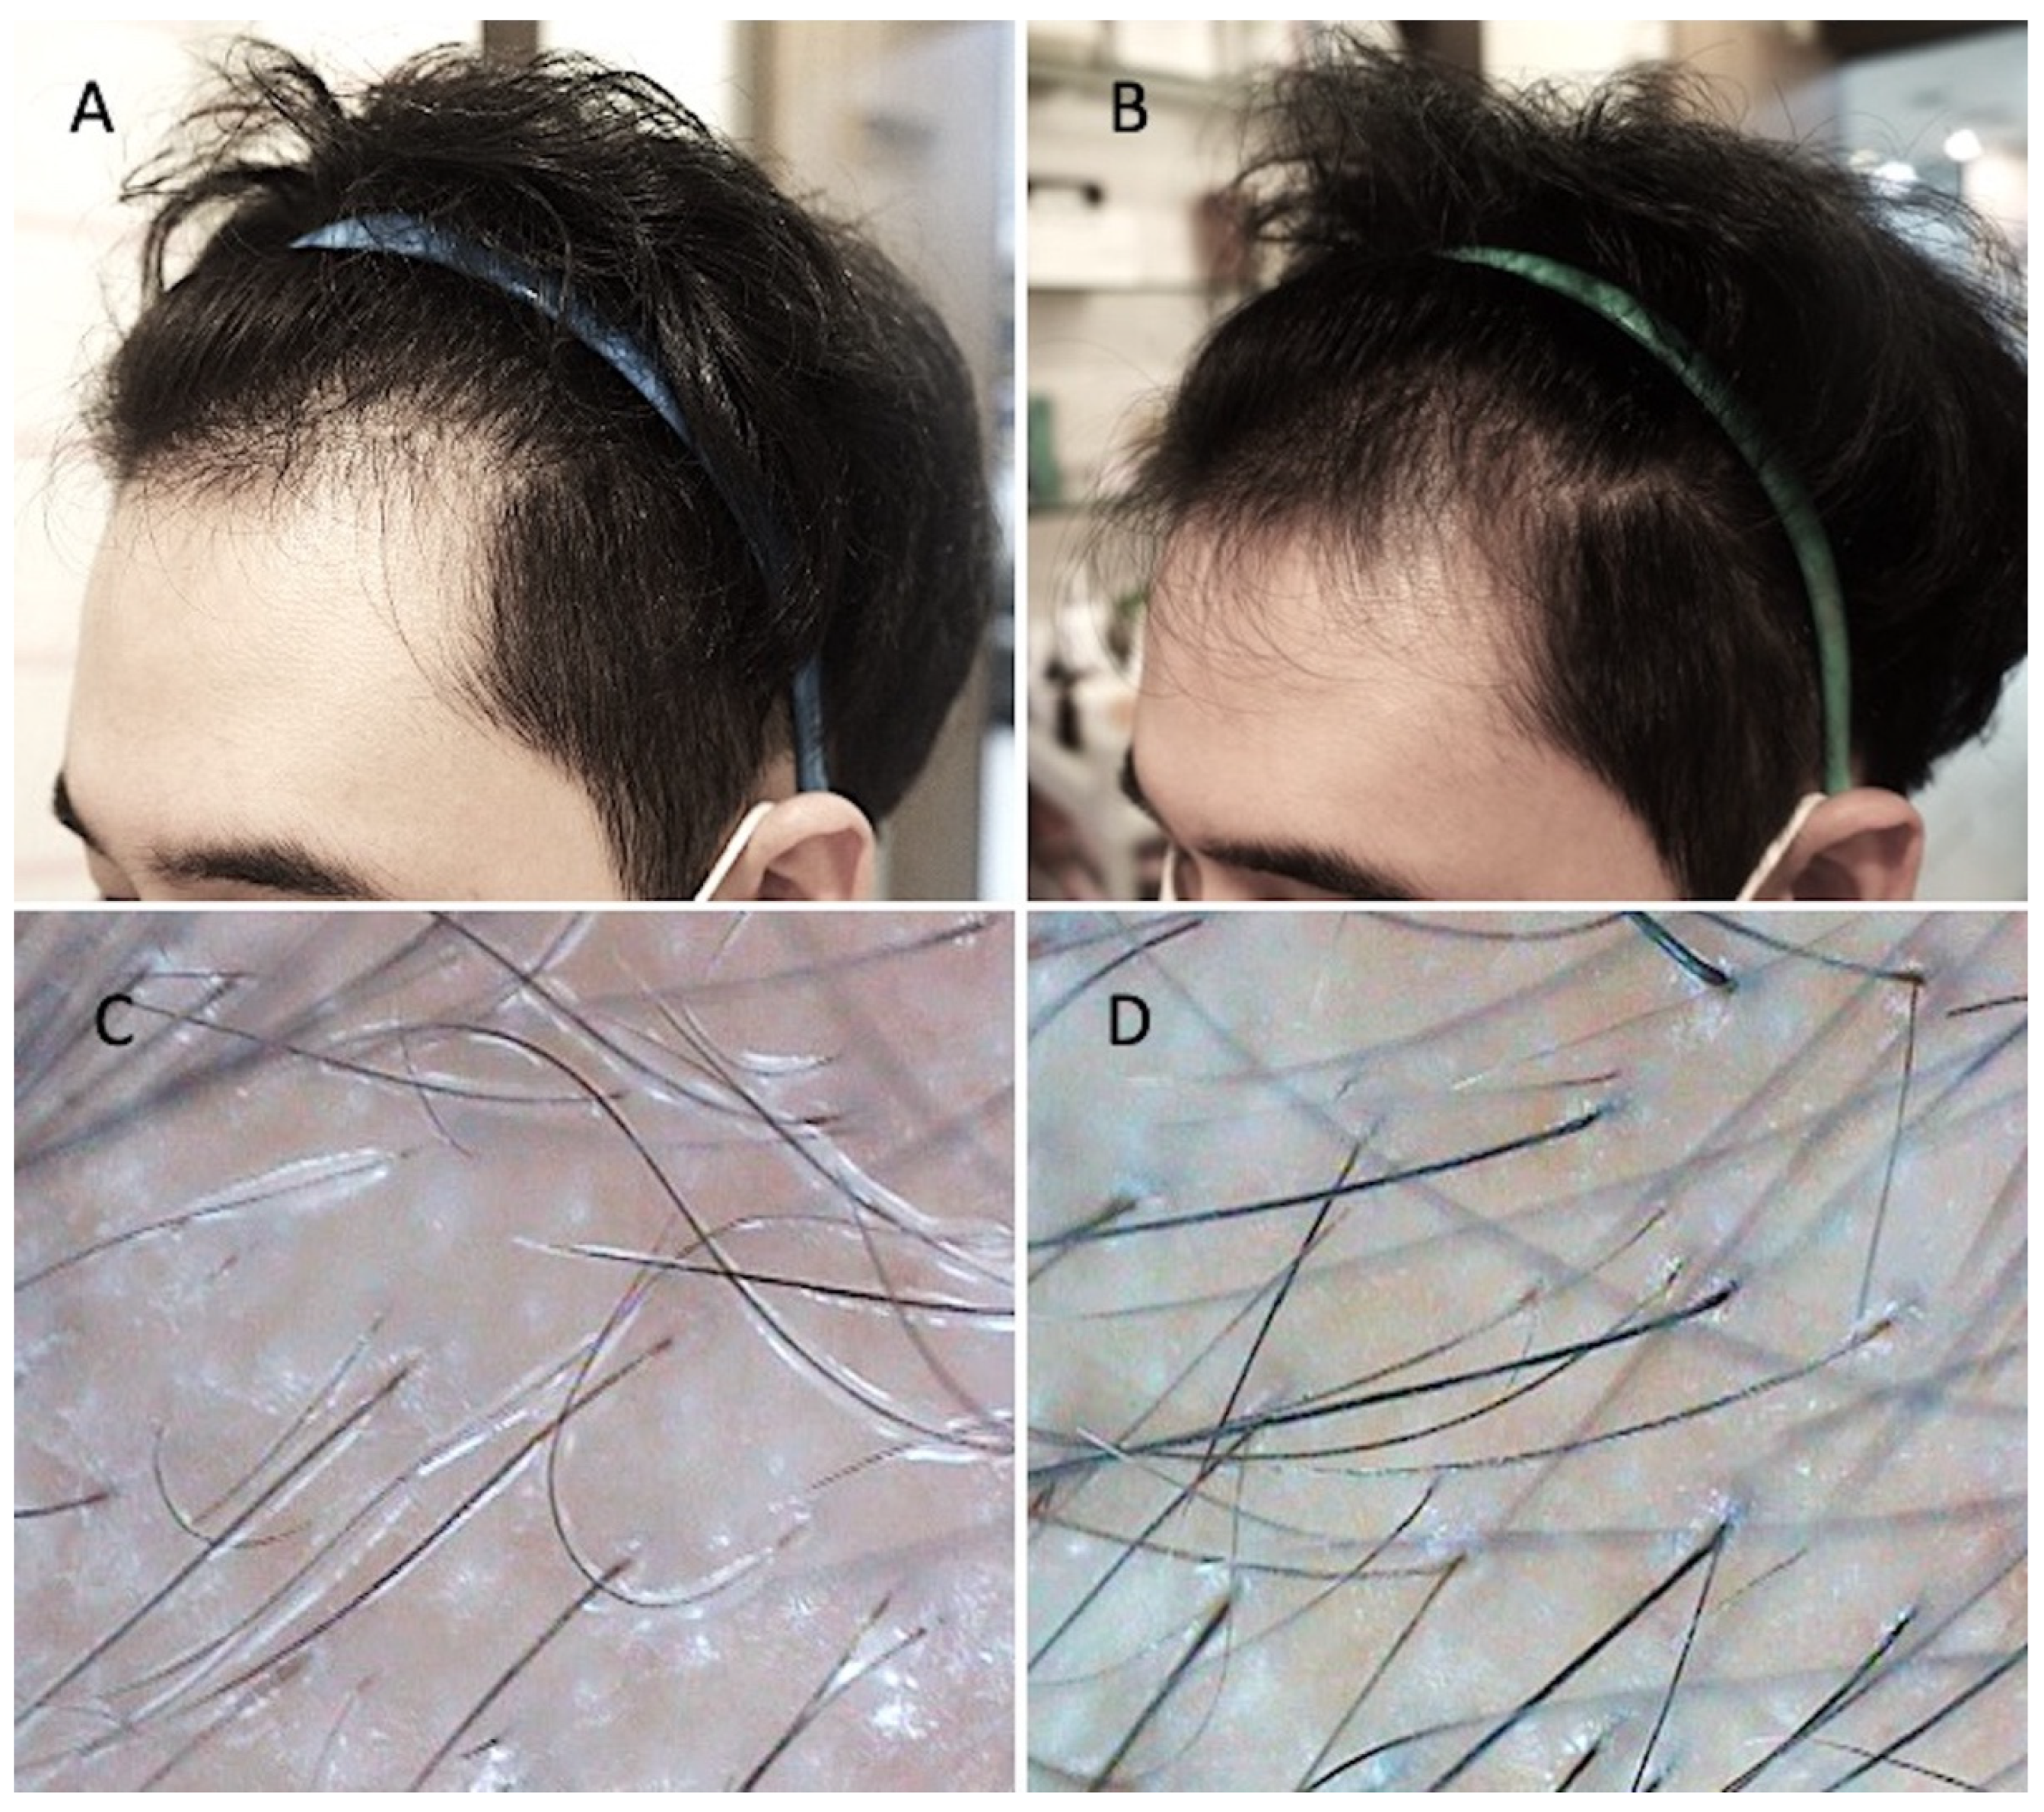 Applied Sciences | Free Full-Text | Hair Growth Booster Effects of  Micro-Needling with Low-Level Led Therapy and Growth Factors on Subjects  Treated with Finasteride®